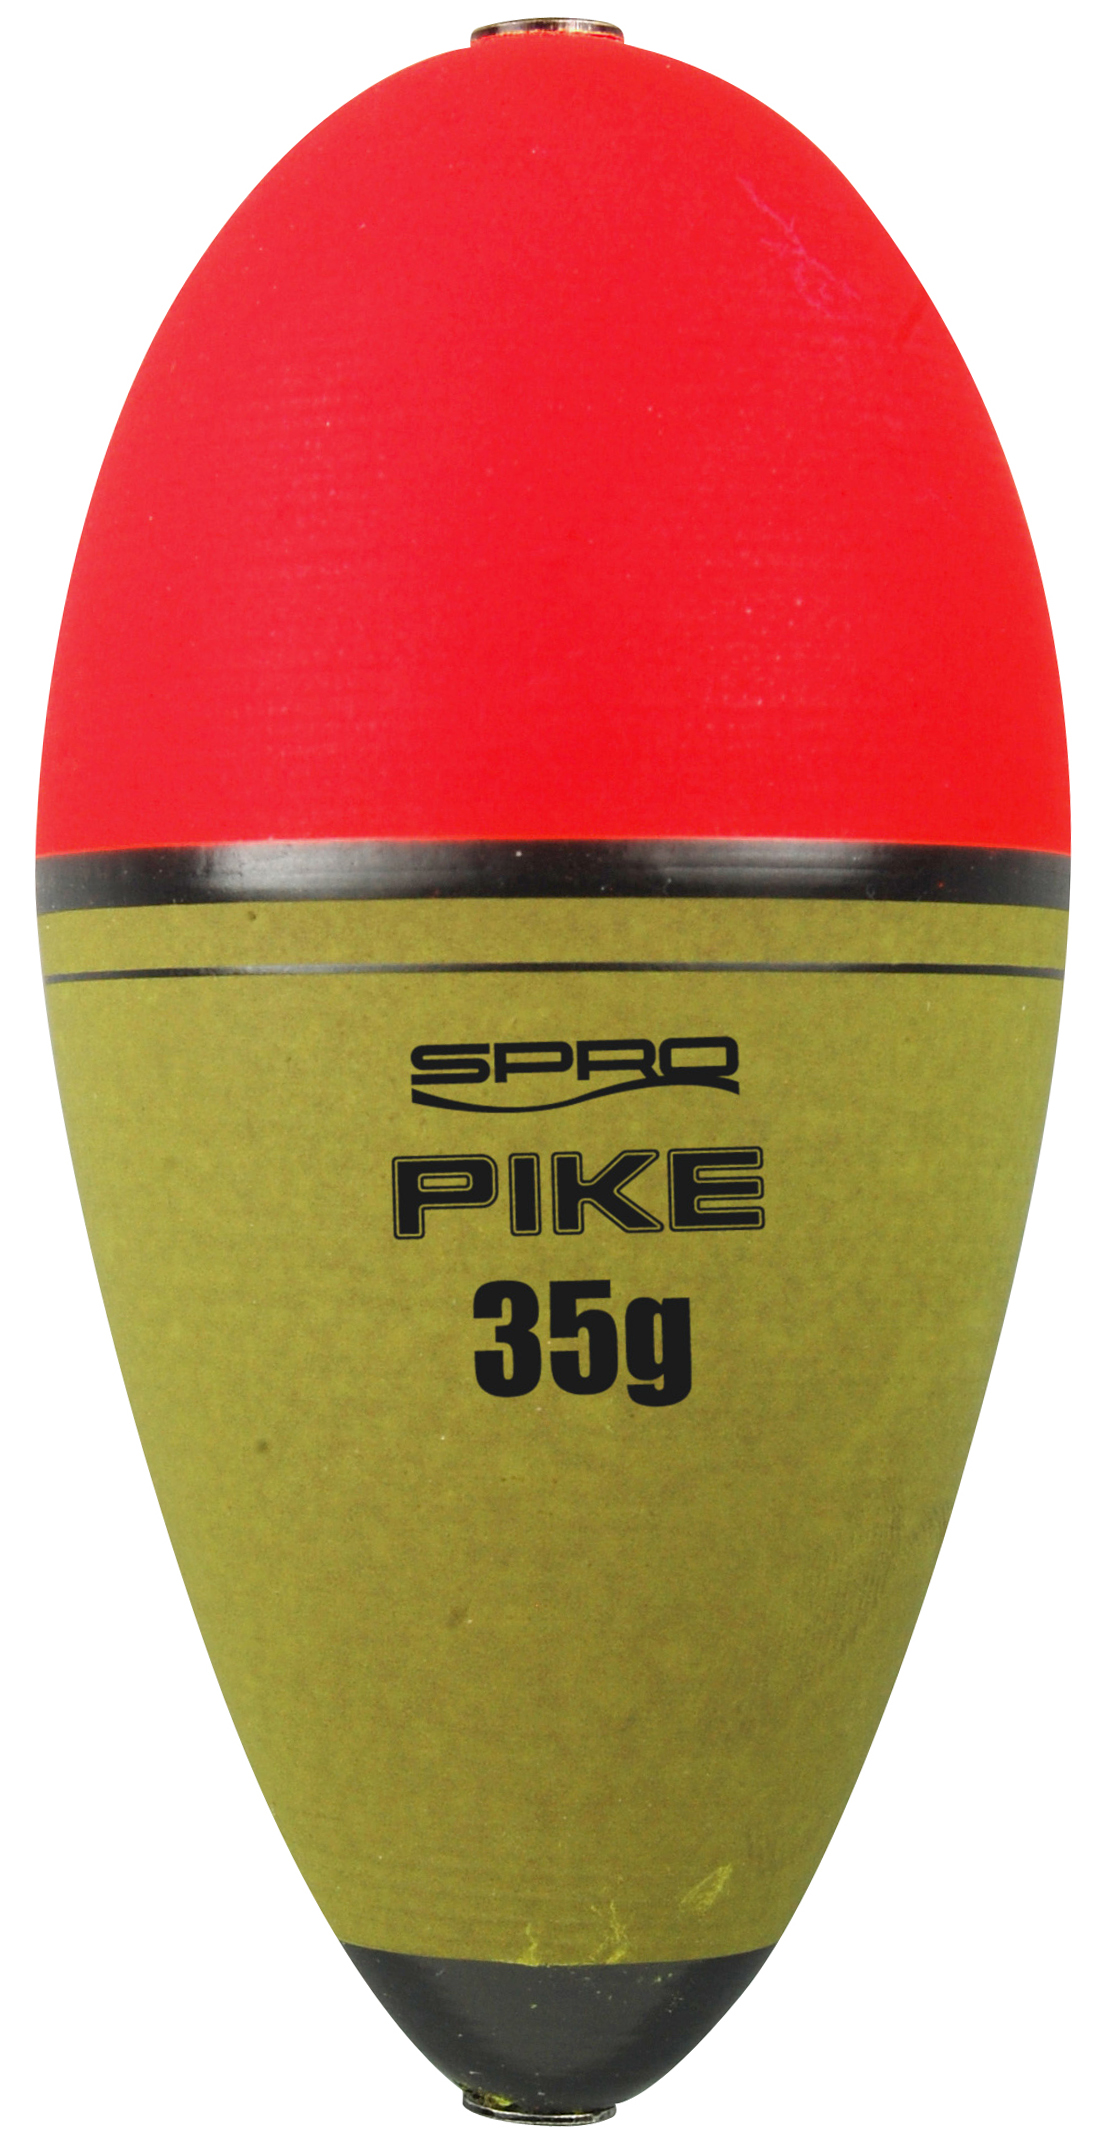 Spro Pike Oval Floats